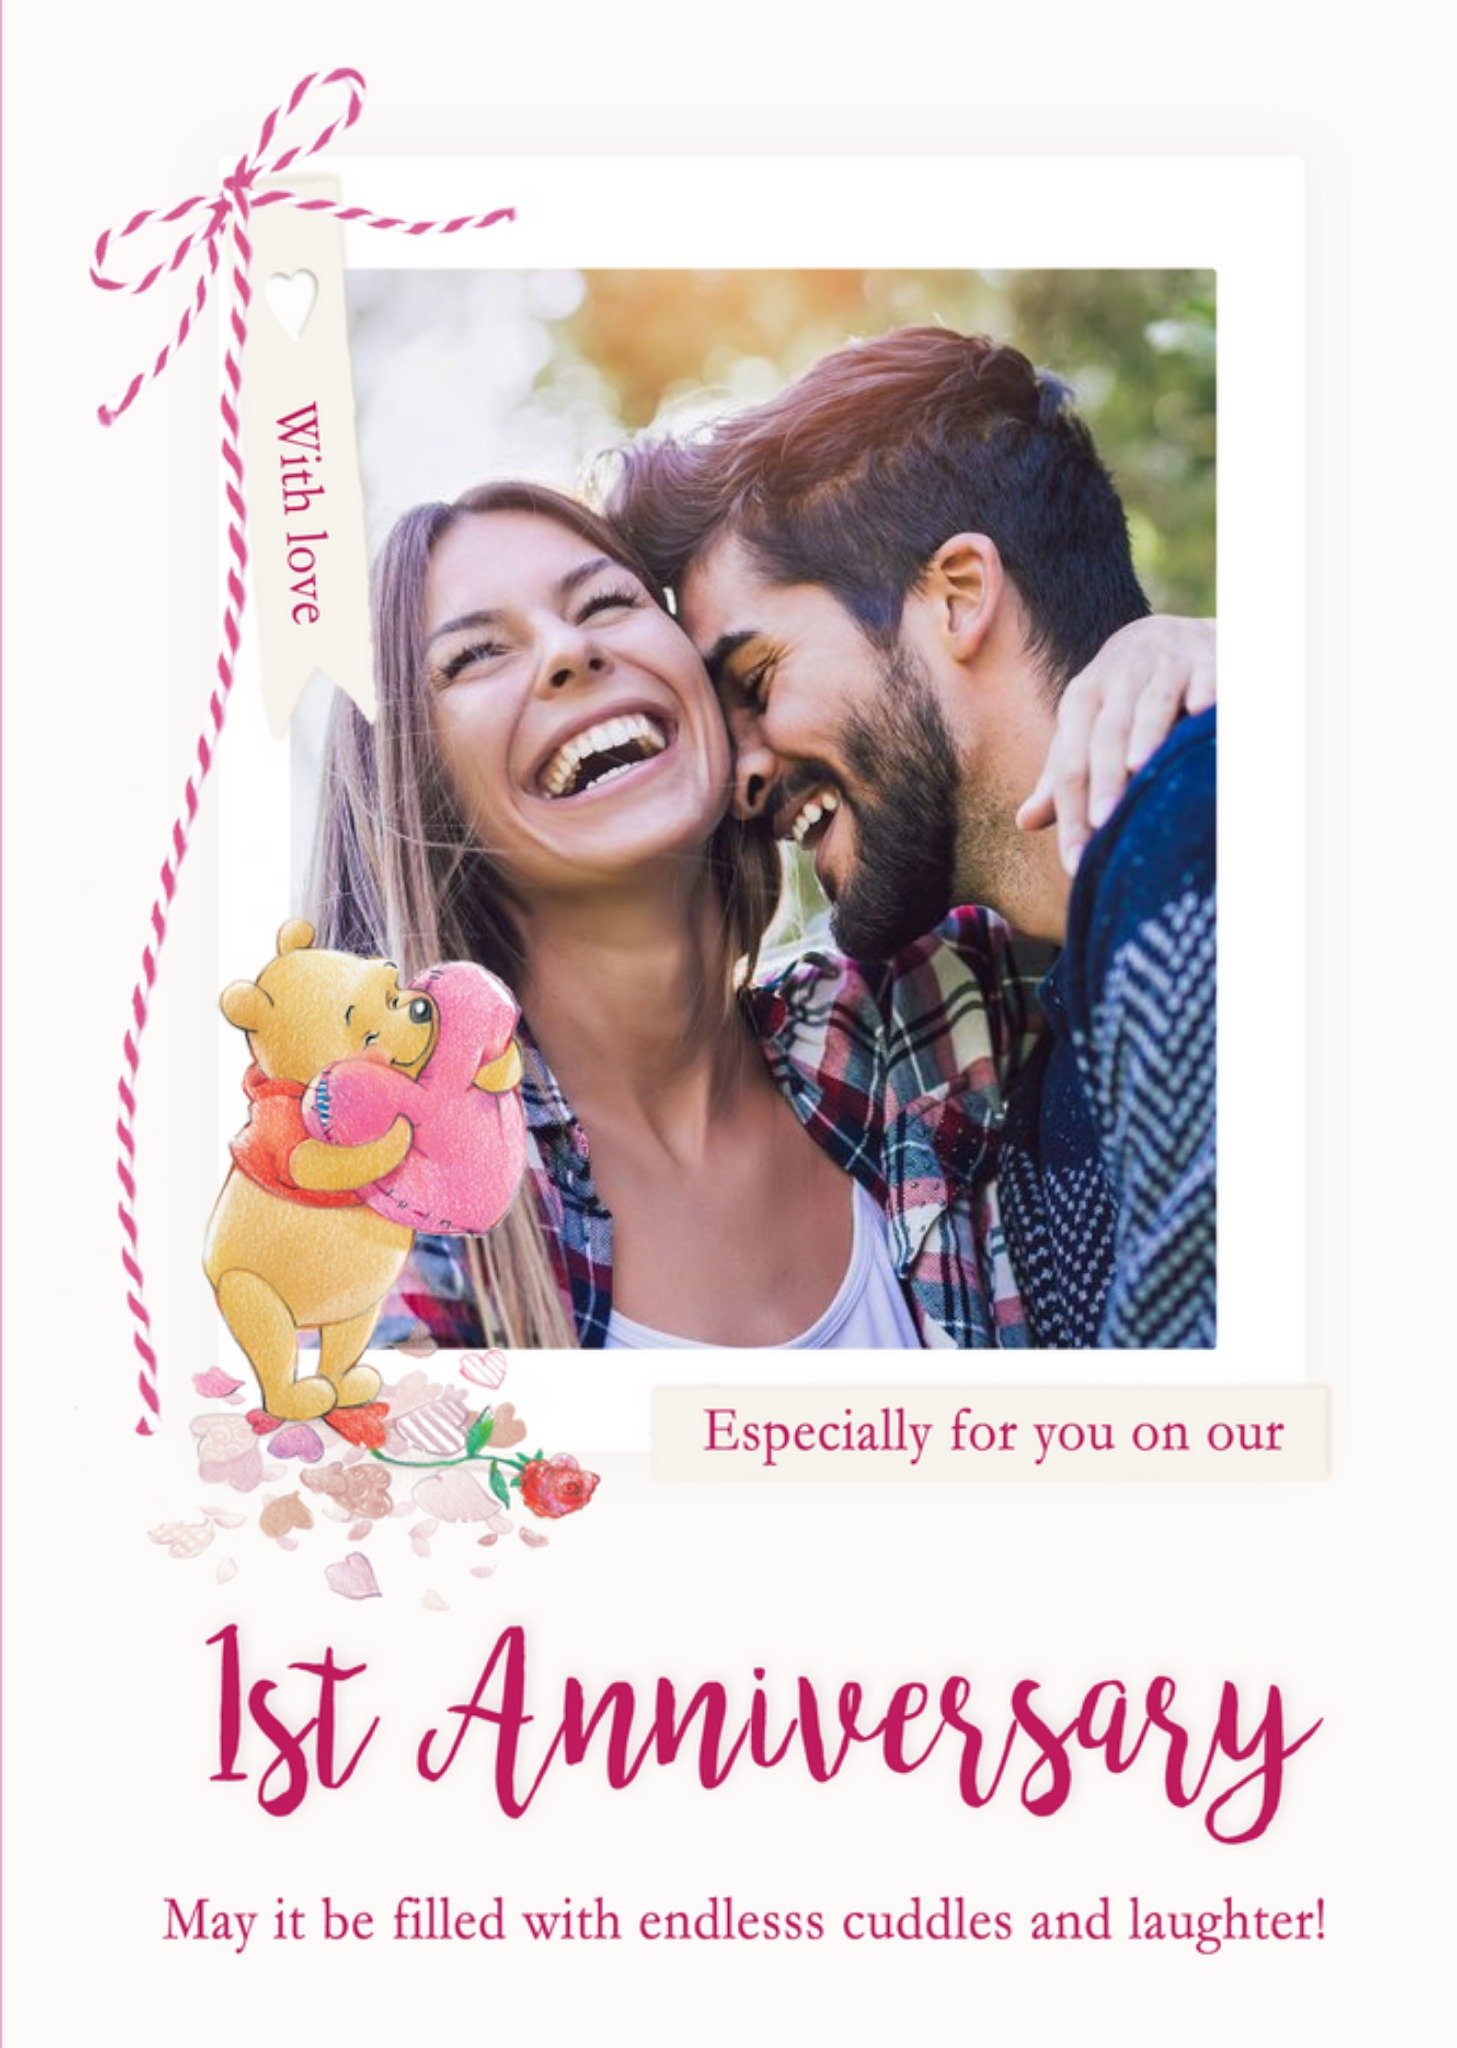 Disney Winnie The Pooh Endless Cuddles And Laughter 1st Anniversary Photo Upload Card Ecard